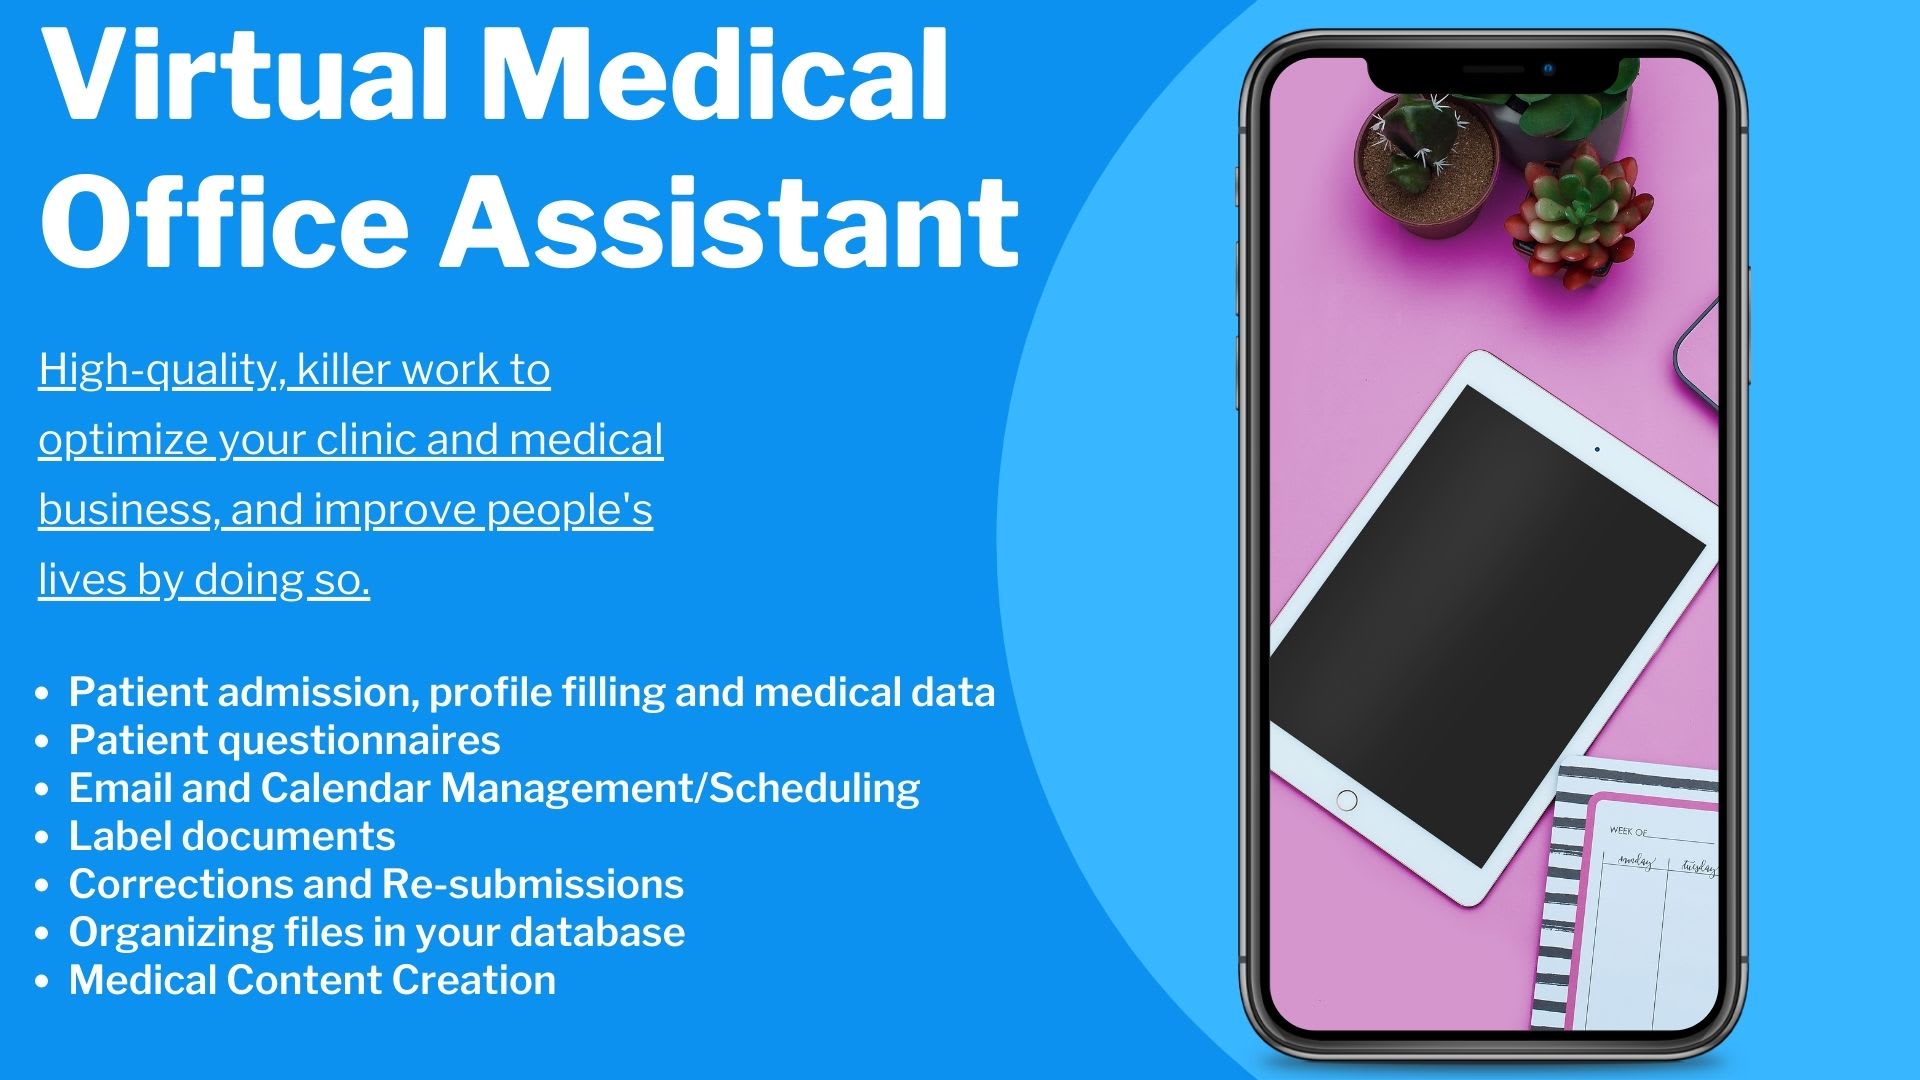 Be your virtual medical office assistant by Lisavpalacios | Fiverr